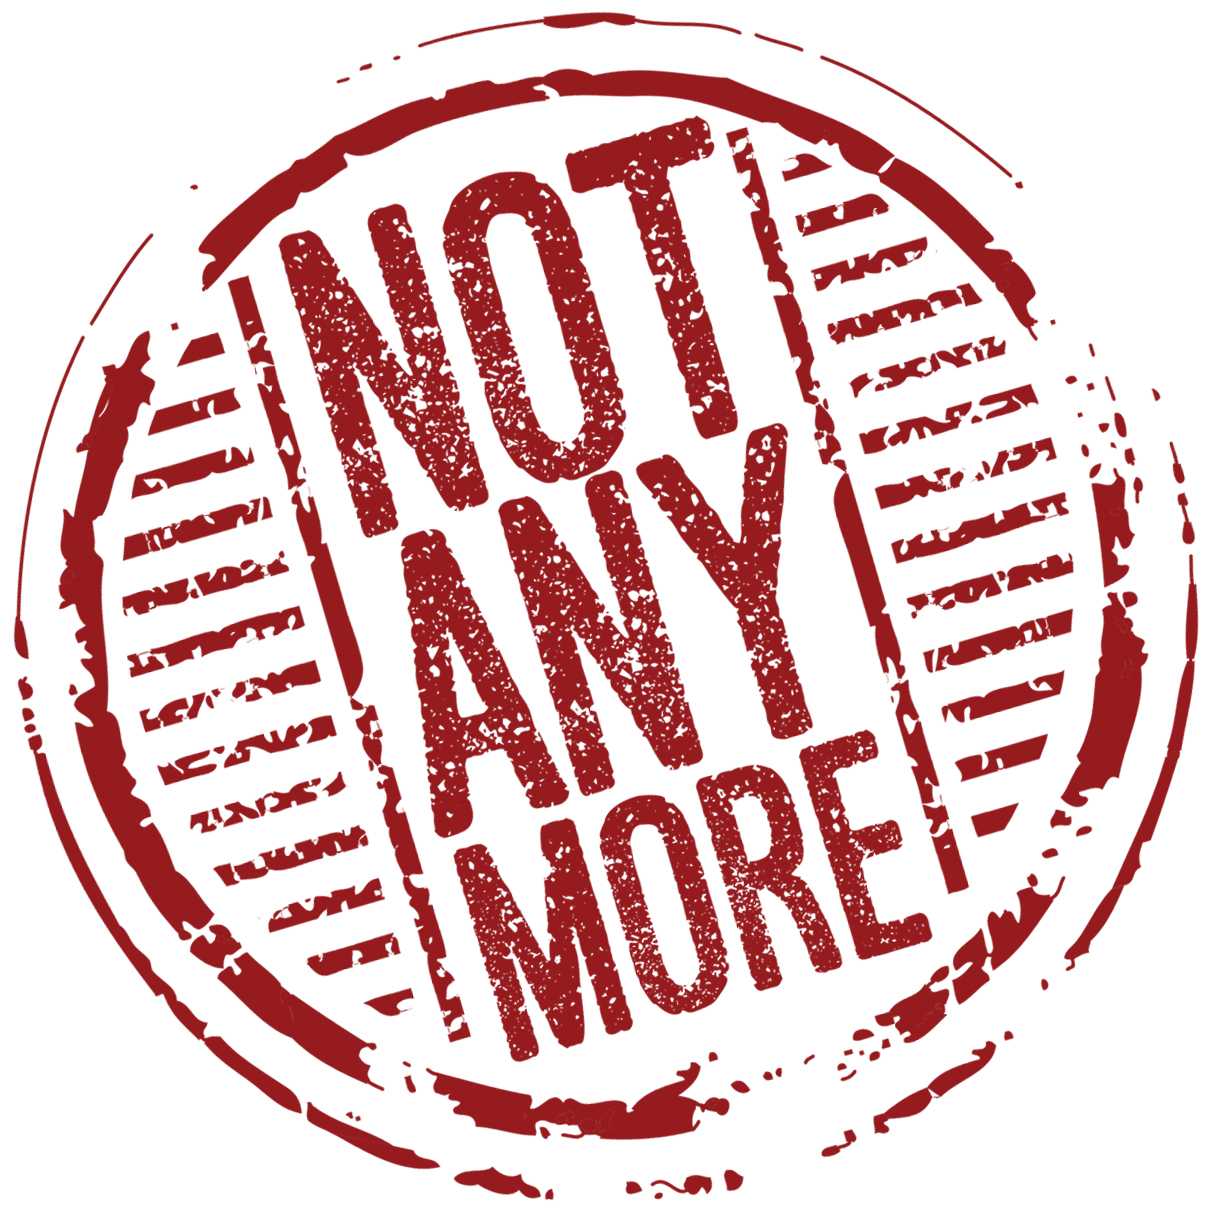 The Not Anymore logo. CSUN freshman, transfer and graduate students are all required to complete Not Anymore by Nov. 13 to register for classes in the Spring 2016 semester. Image courtesy of Barbara Wells, Campus Programs Director of Student Success and Nformd.